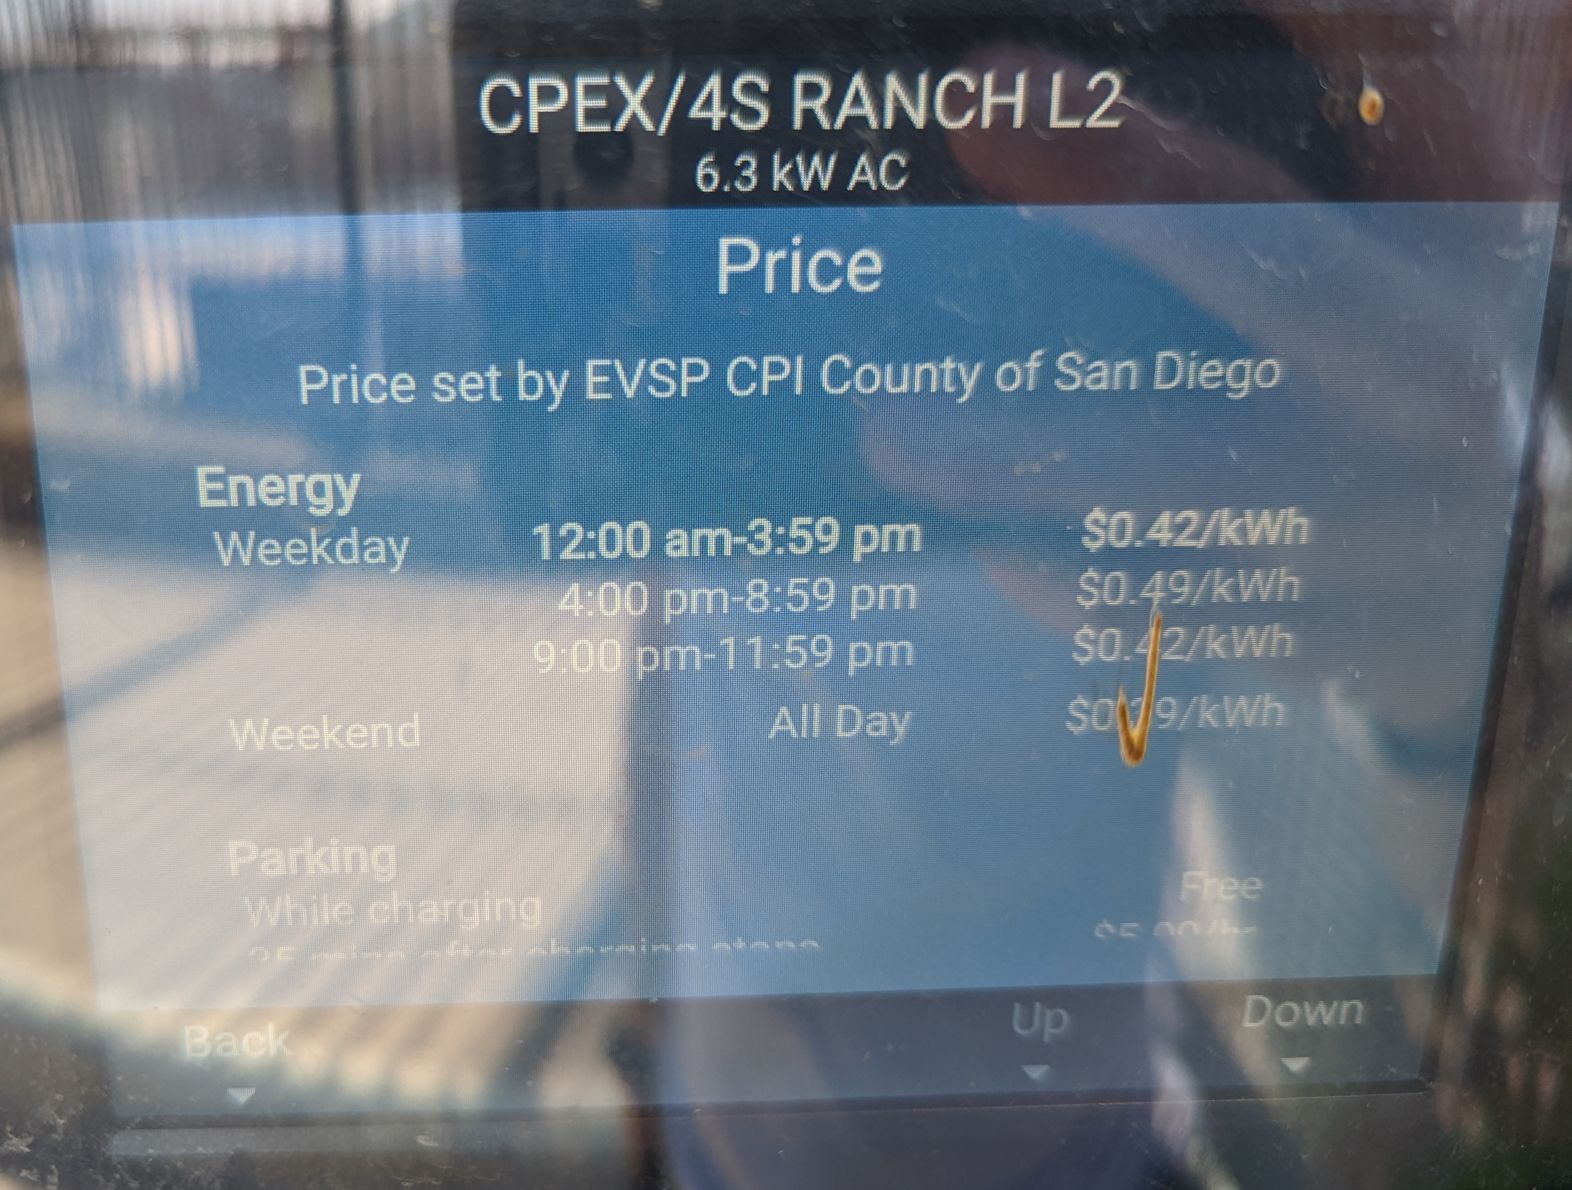 ChargePoint pricing displaying $0.42/kWh and $0.49/kWh